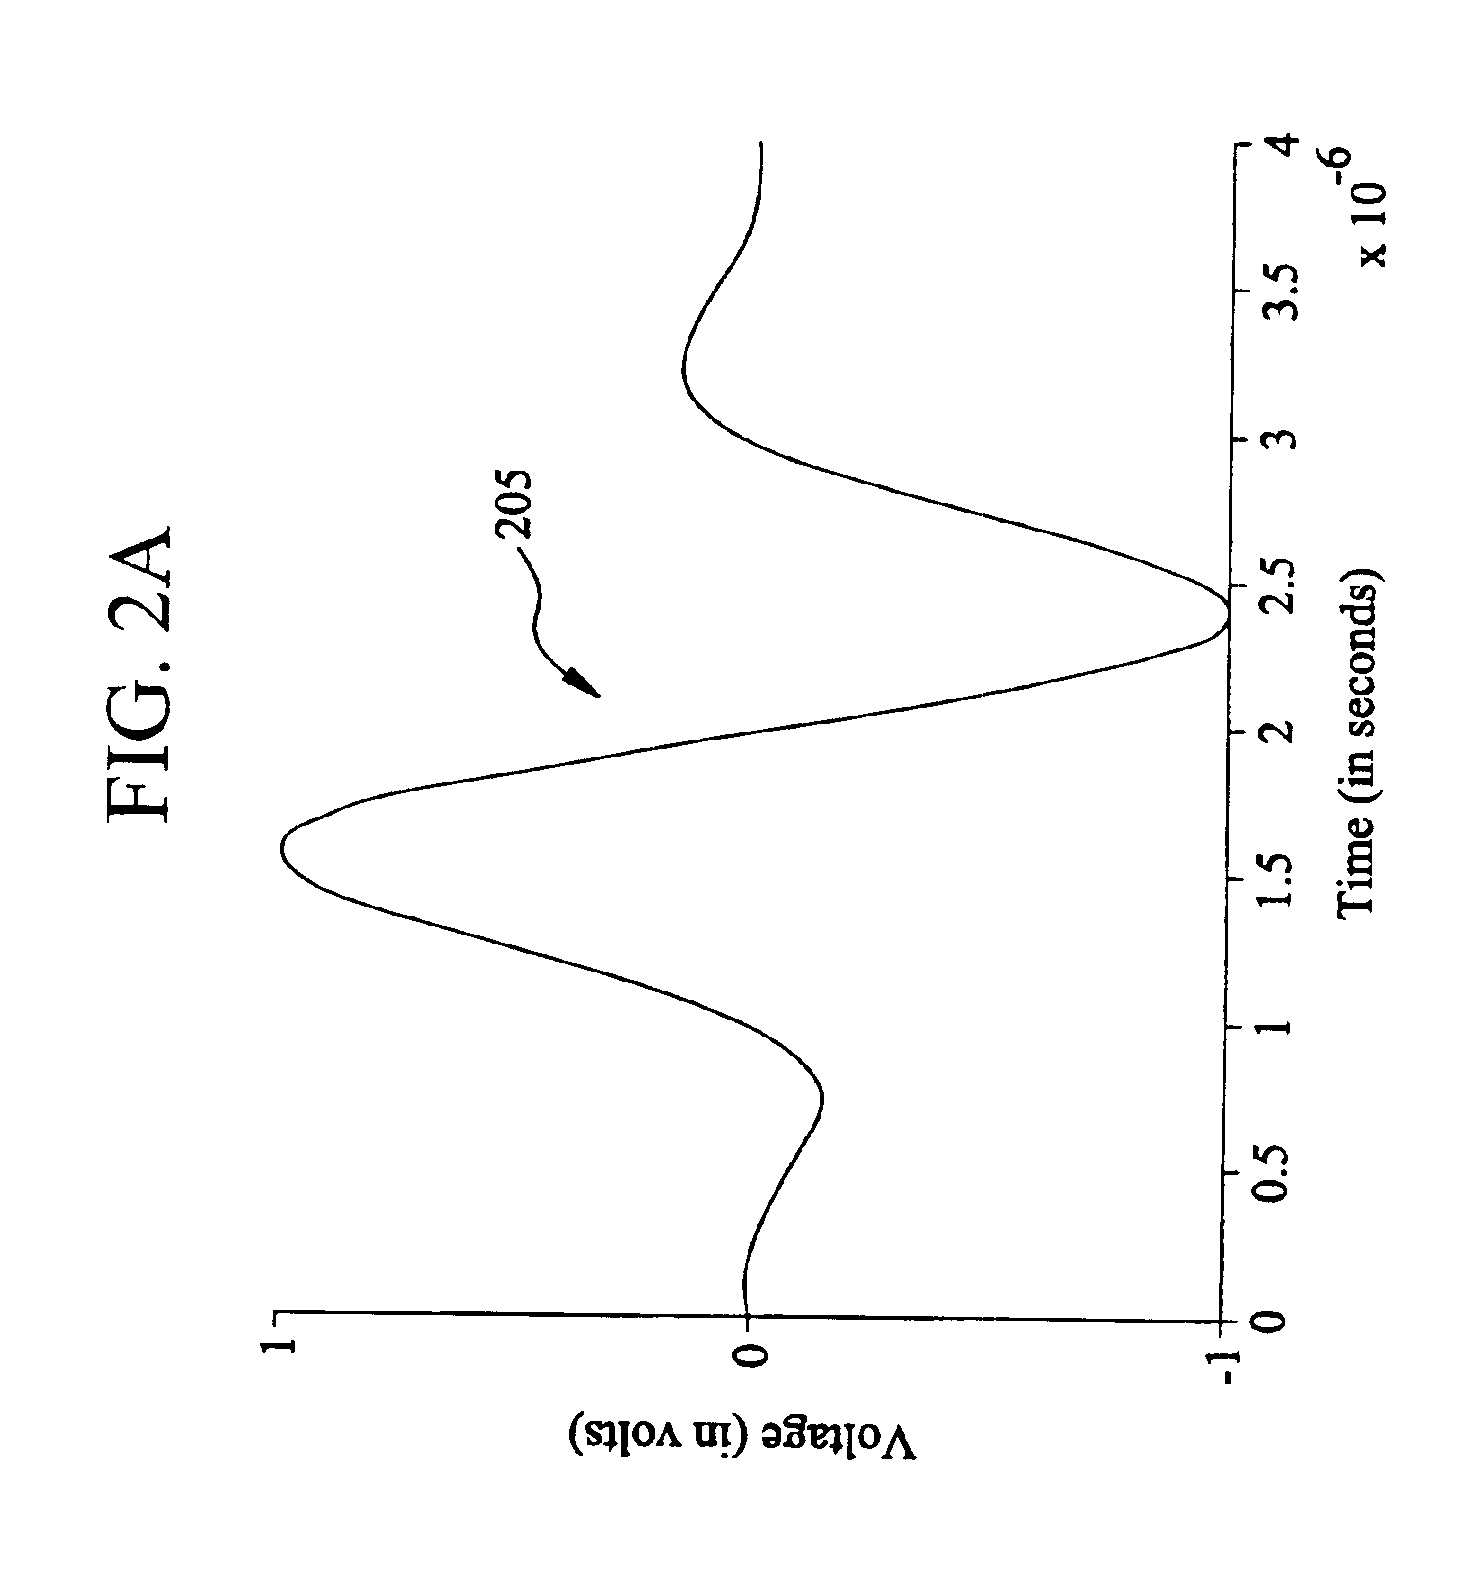 System and method for locating and determining discontinuities and estimating loop loss in a communications medium using frequency domain correlation